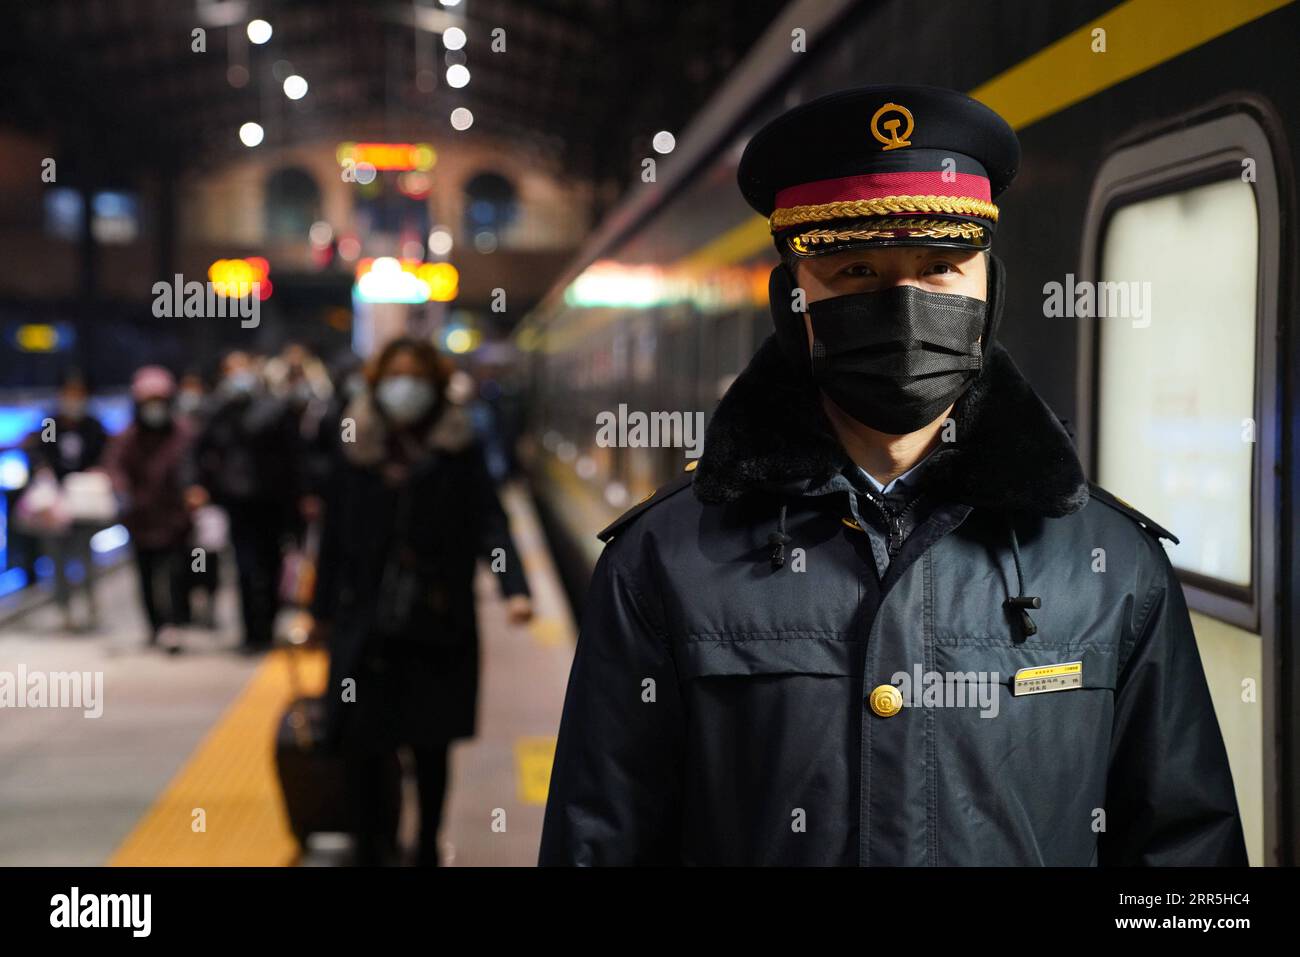 210107 -- HARBIN, Jan. 7, 2021 -- A staff member guides passengers outside train K7093 heading for Hailar, north China s Inner Mongolia Autonomous Region, at Harbin Railway Station in Harbin, northeast China s Heilongjiang Province, Jan. 6, 2021. Train No. K7093/4, connecting Harbin and Hailar, runs a distance of 1,320 kilometers and stops at 52 stations during the about 26-hour trip. The train stops every 30 minutes on average due to so many stops and is known as the slowest train in the forest area between the two destinations. Having operated for over 30 years, the train s facilities have w Stock Photo